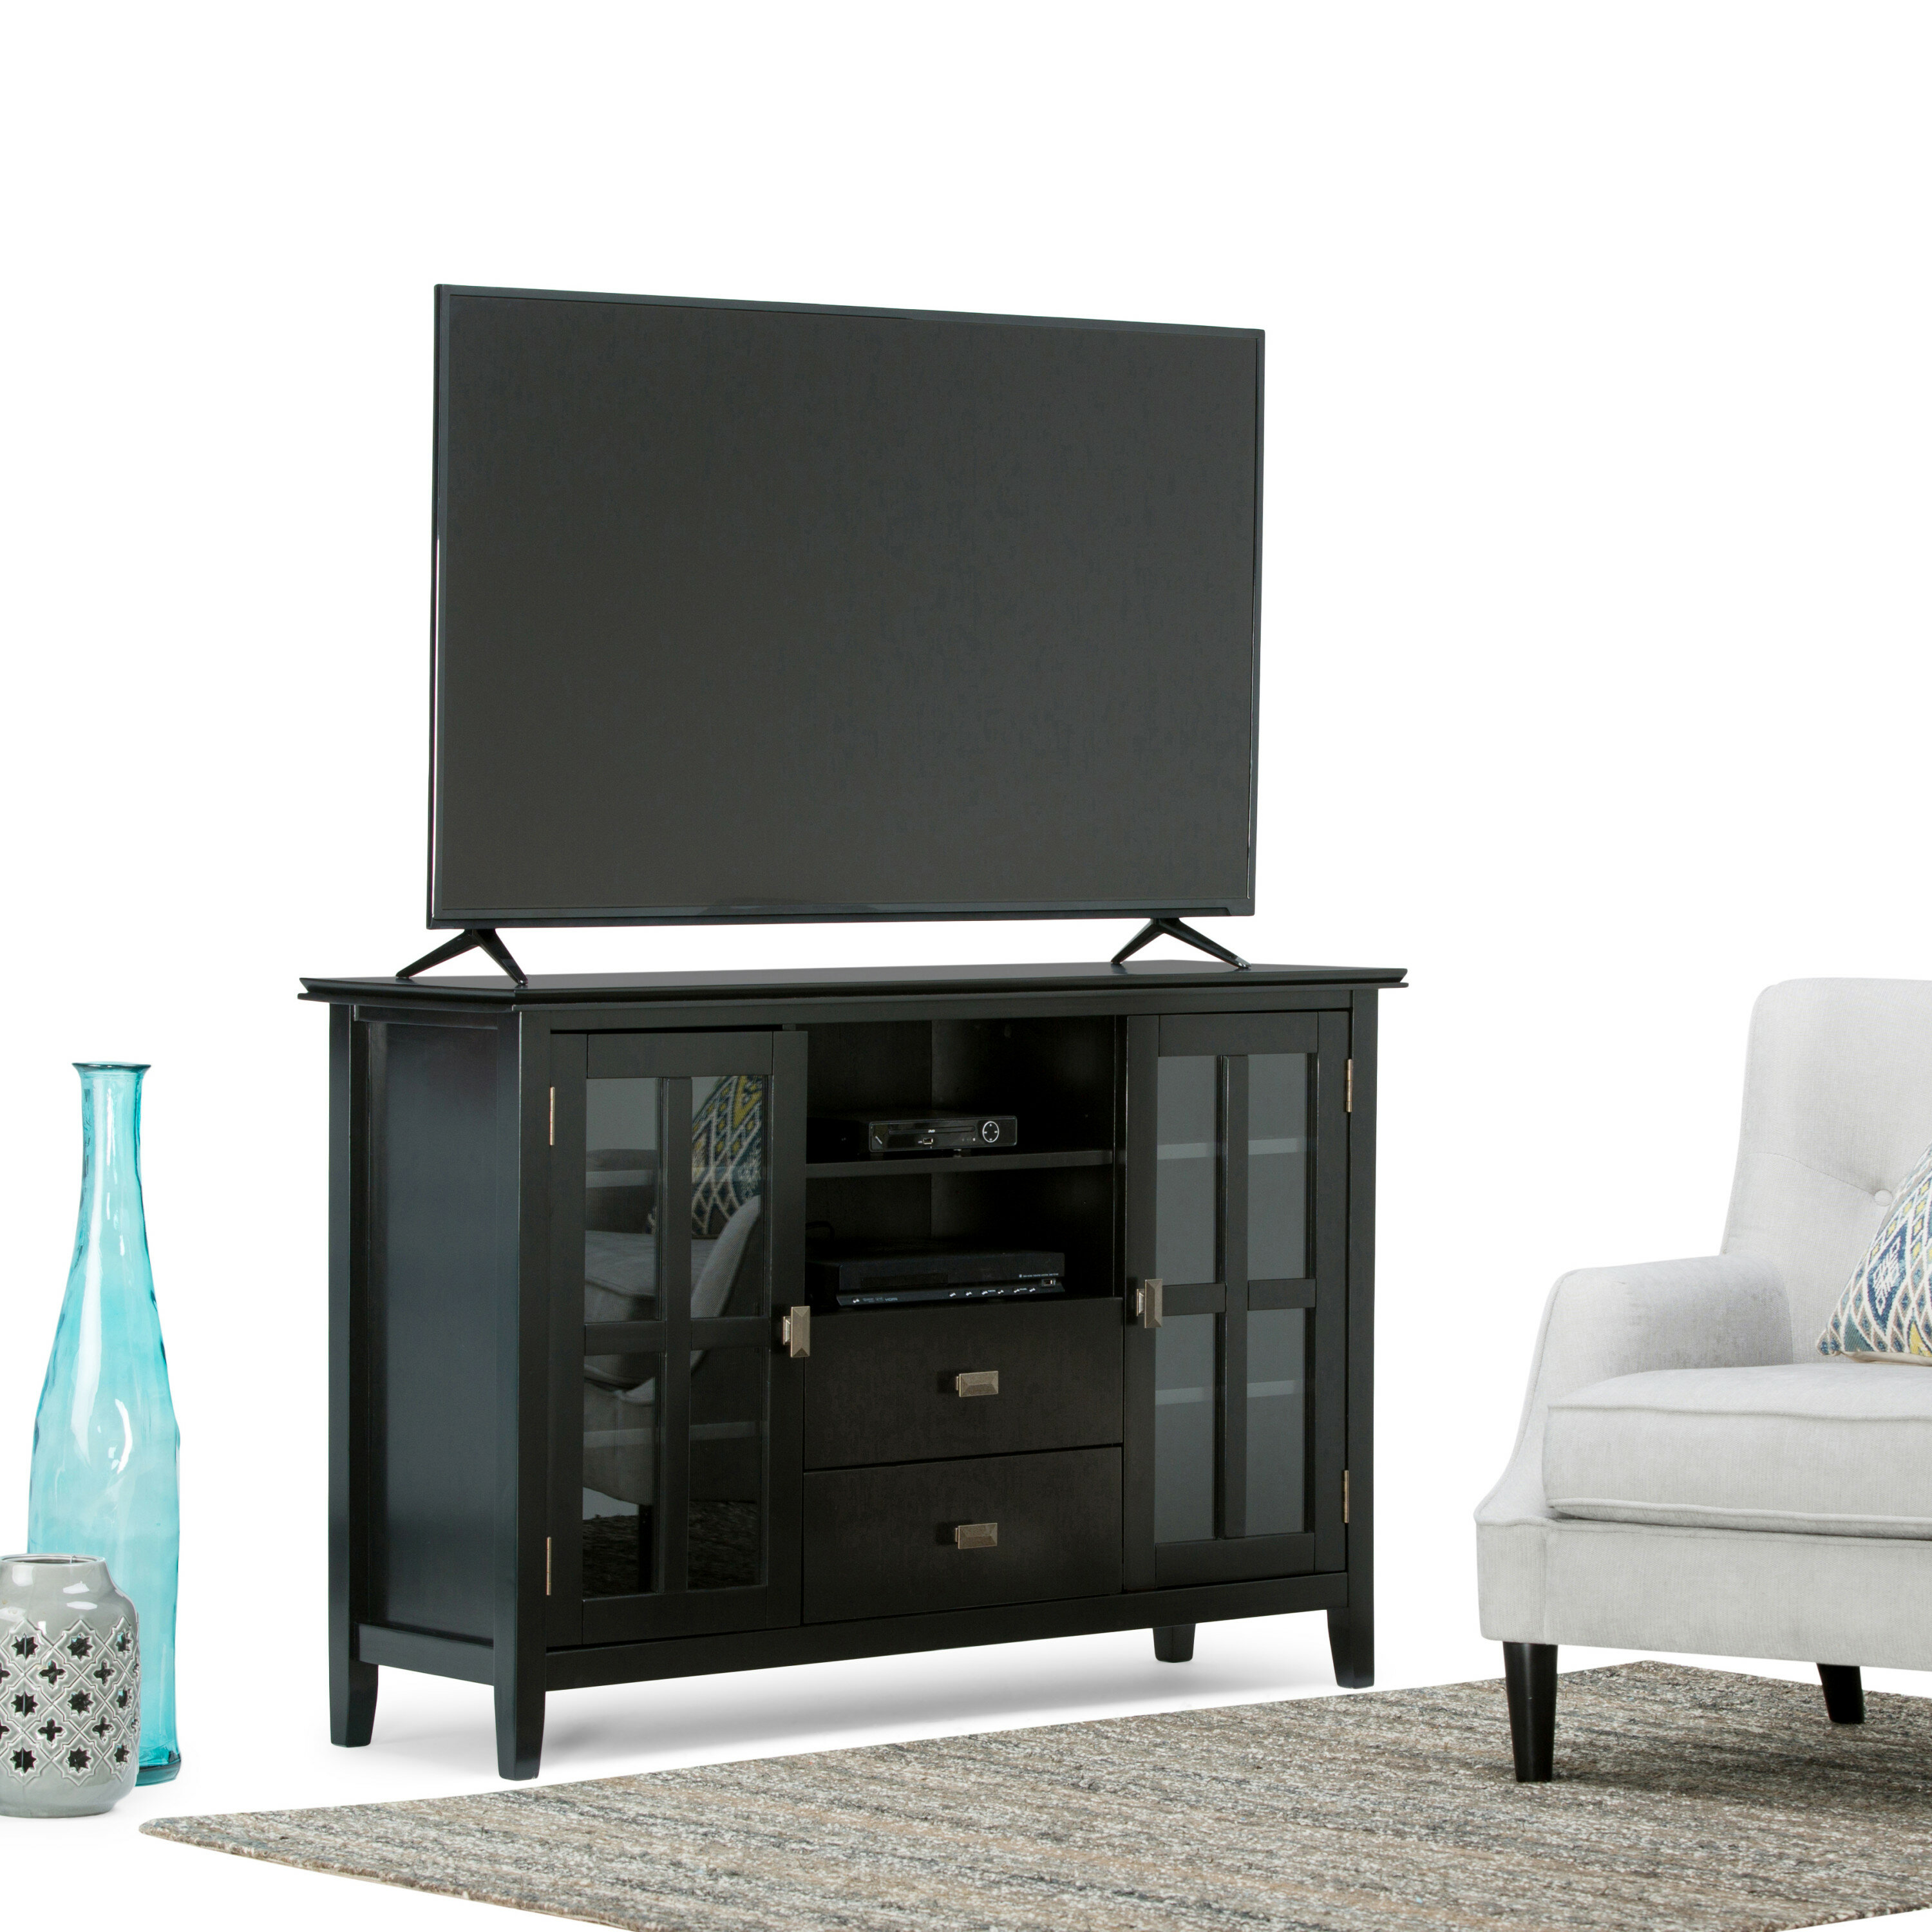 Gosport Solid Wood Tv Stand For Tvs Up To 58 Inches